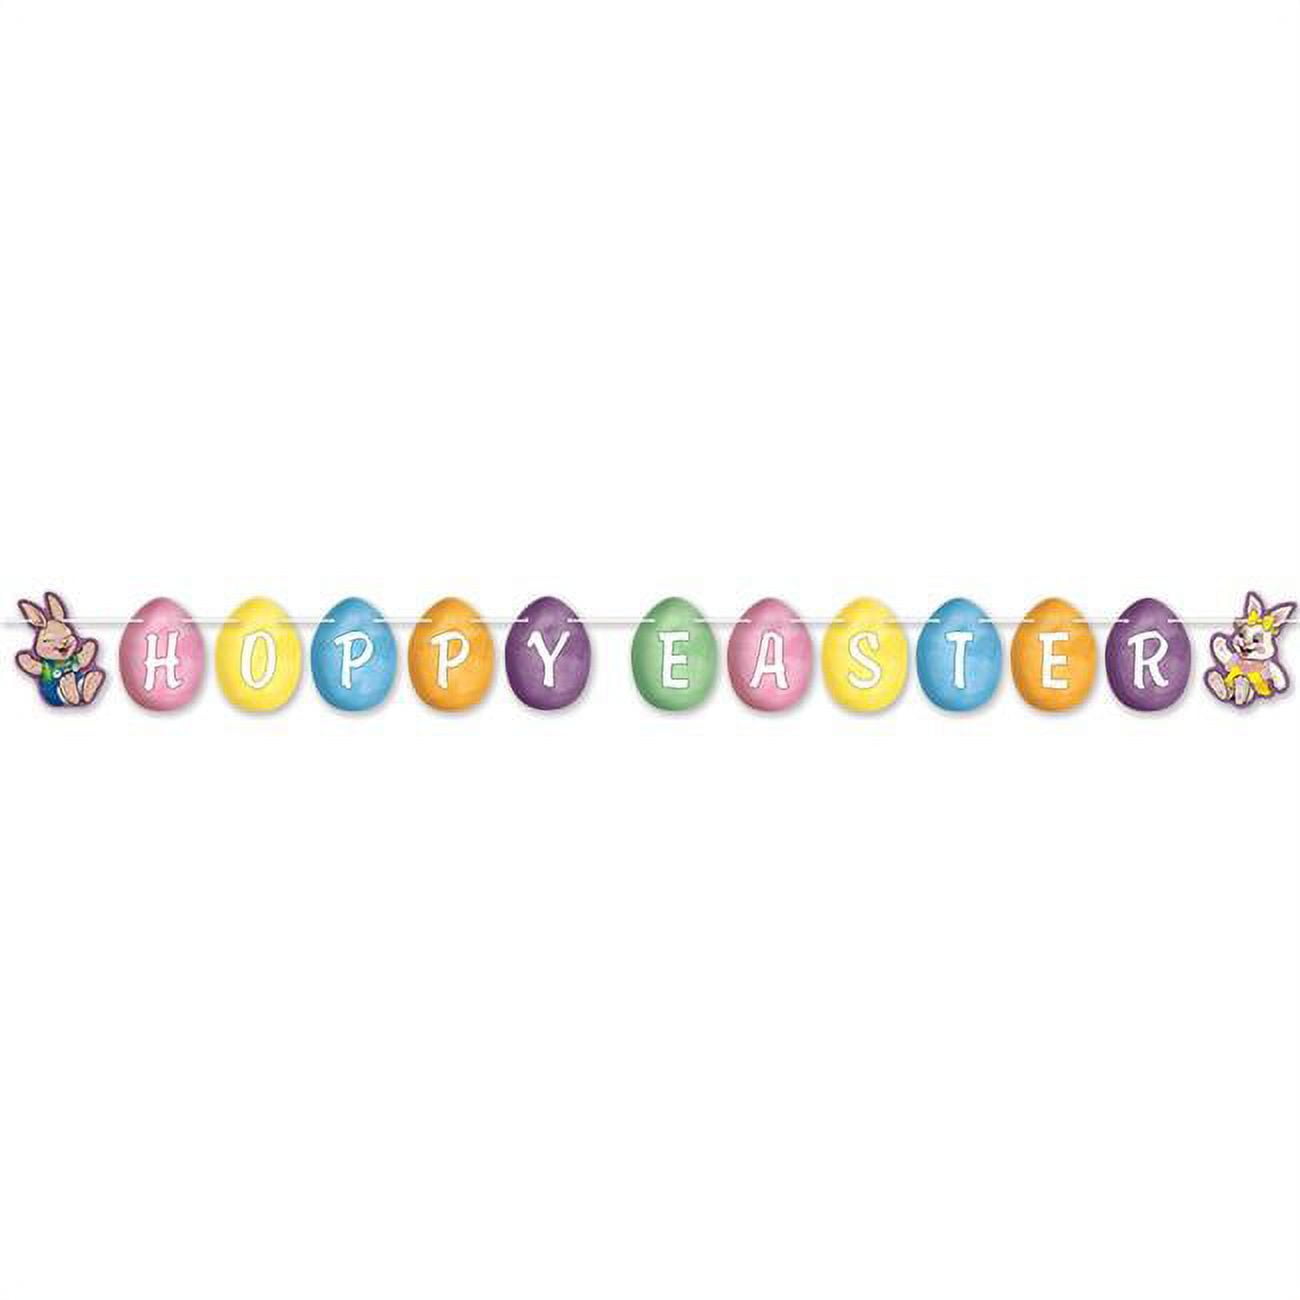 Beistle 40012 6.25 in. x 8 ft. Easter Streamer - Pack of 12 -  Beistle Co